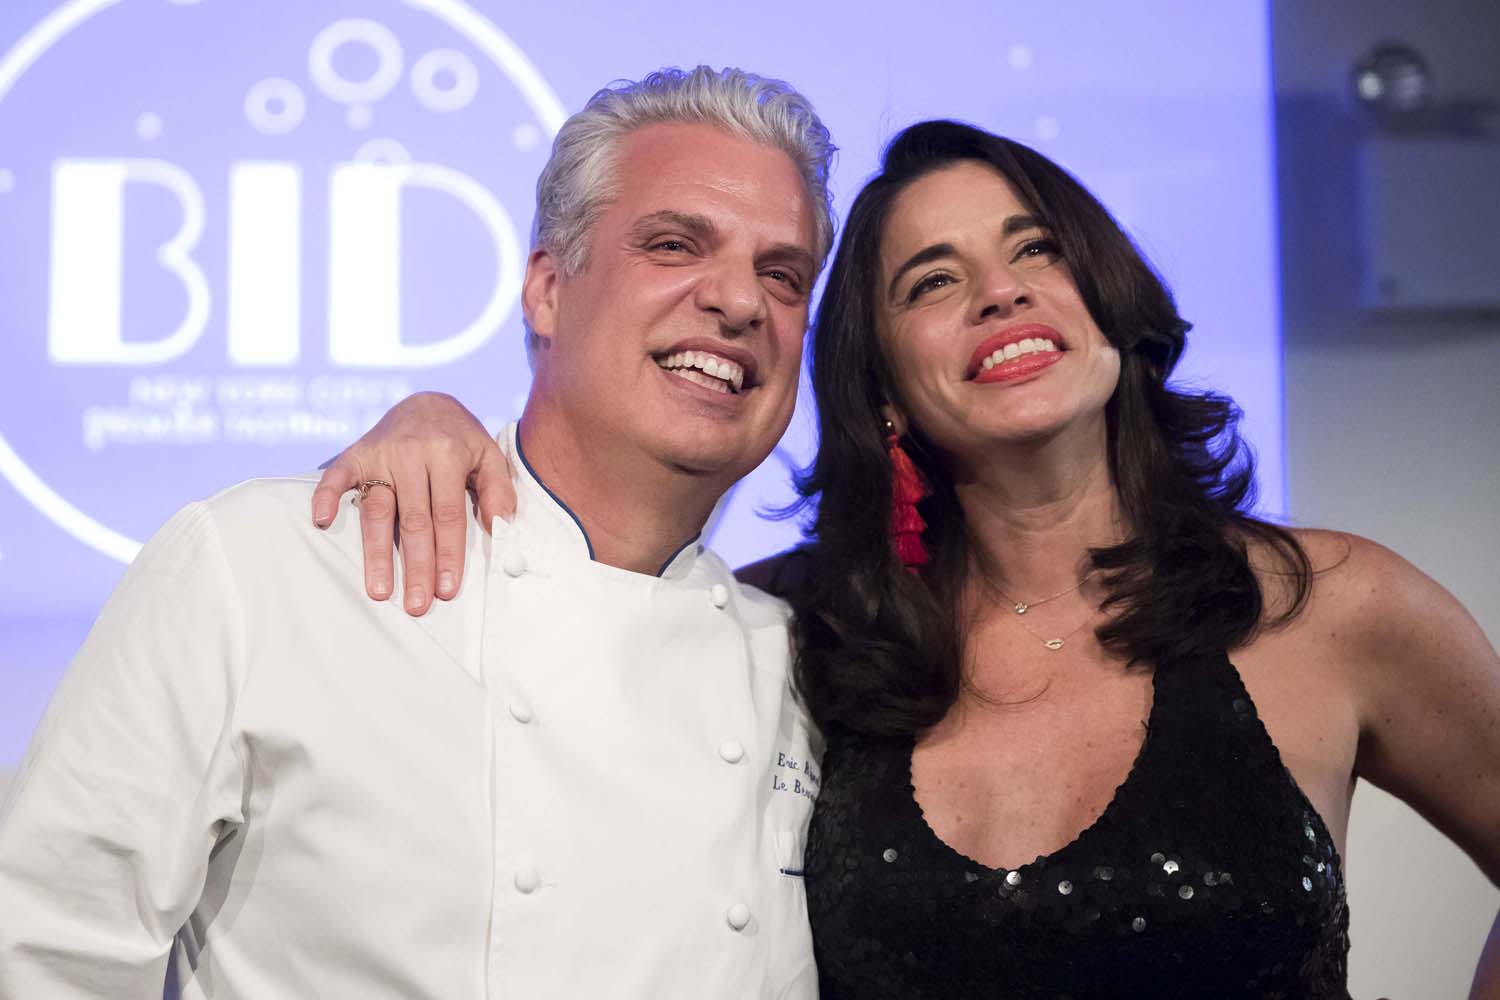 Eric Ripert and Wife at City Harvest